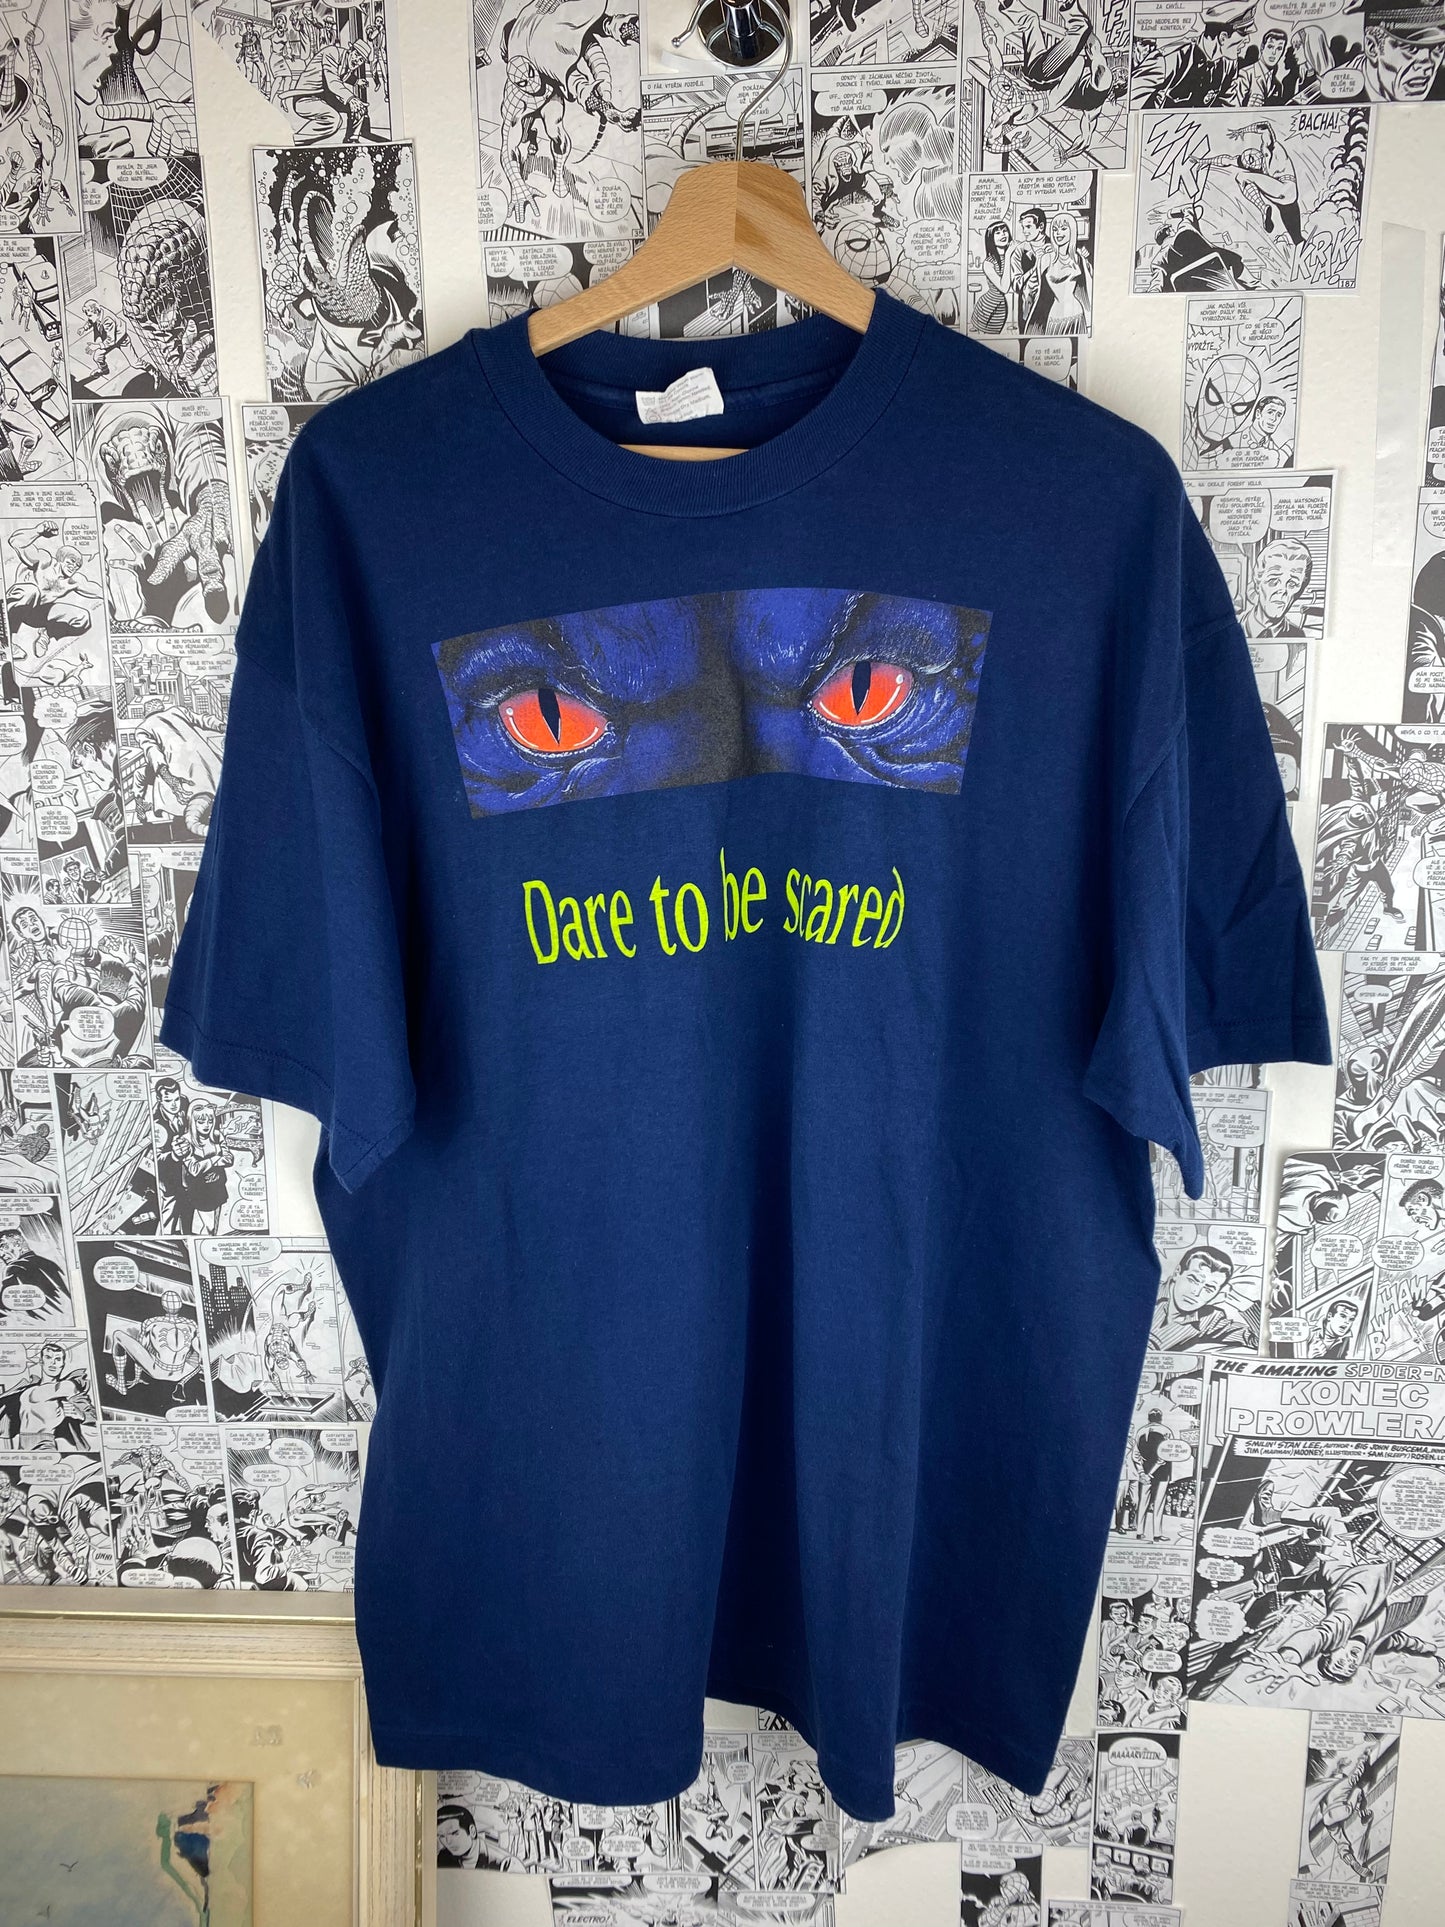 Vintage “Dare to be Scared” - Robin Jarvis Horror Book t-shirt - size XL